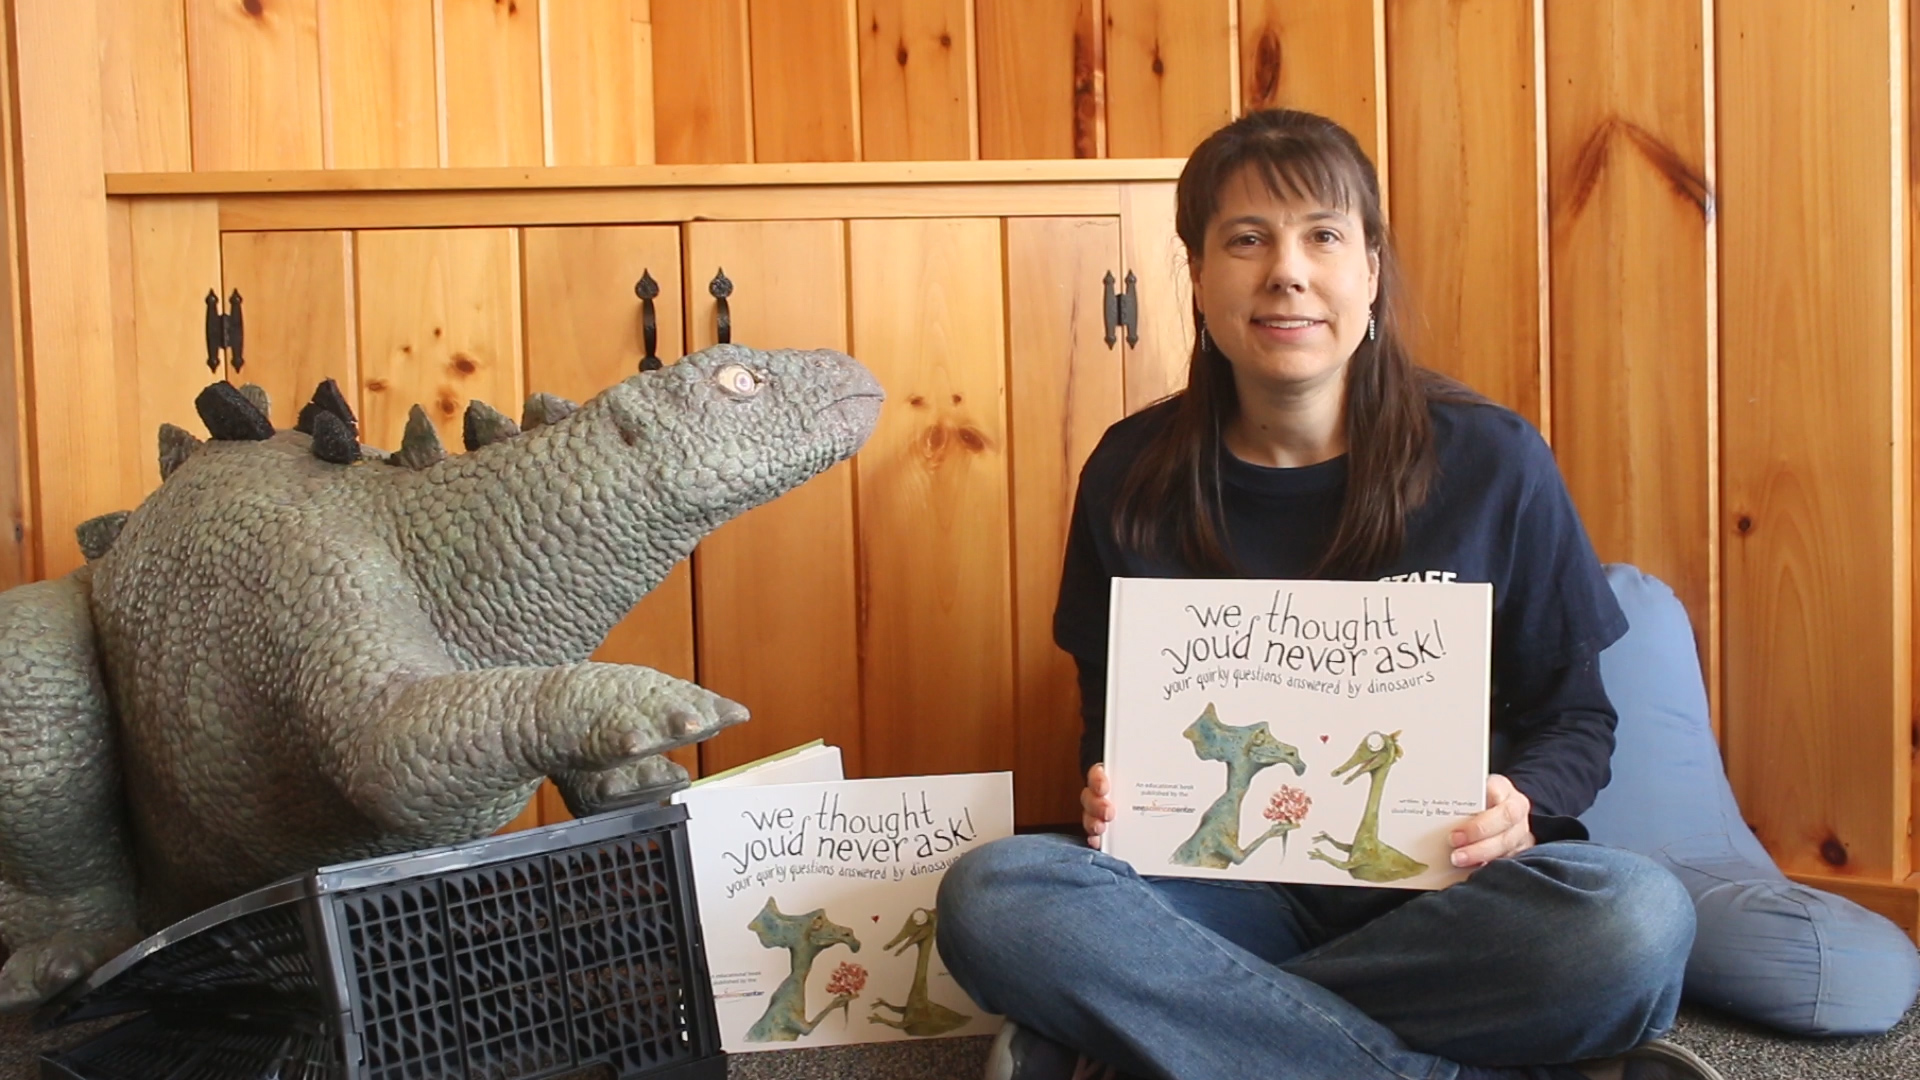 woman seated with stuffed dinosaur and book